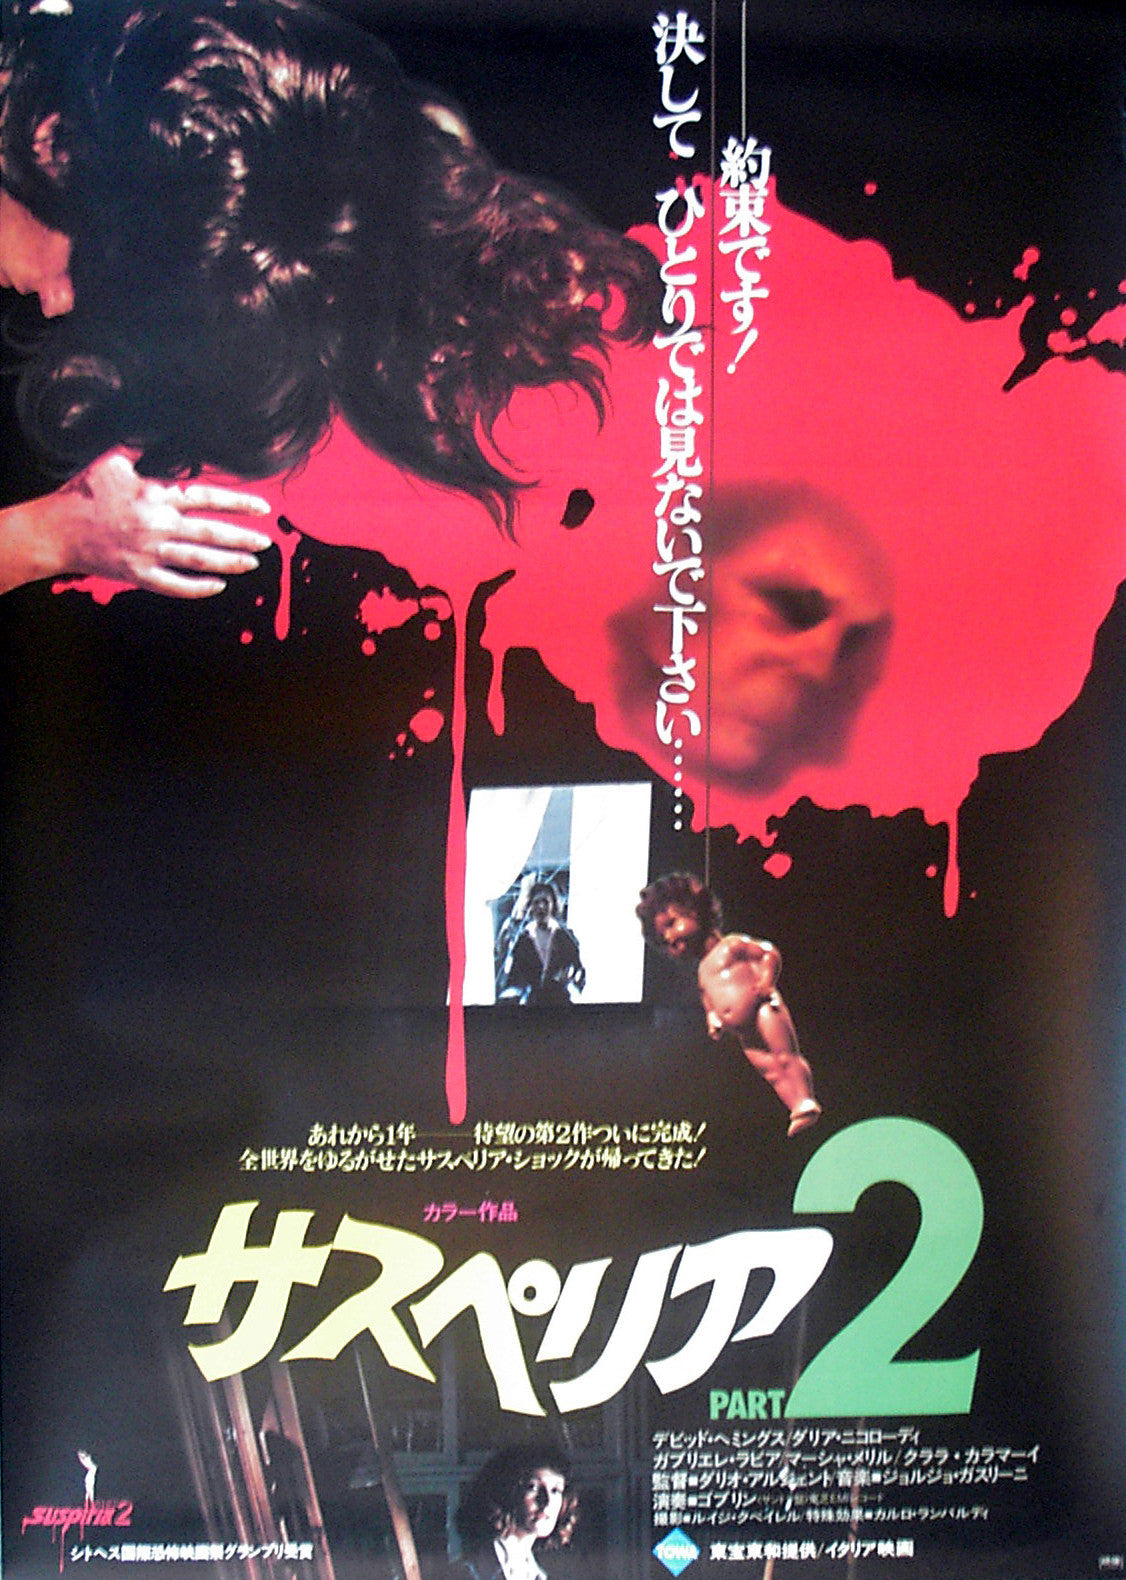 DEEP RED - Japanese poster